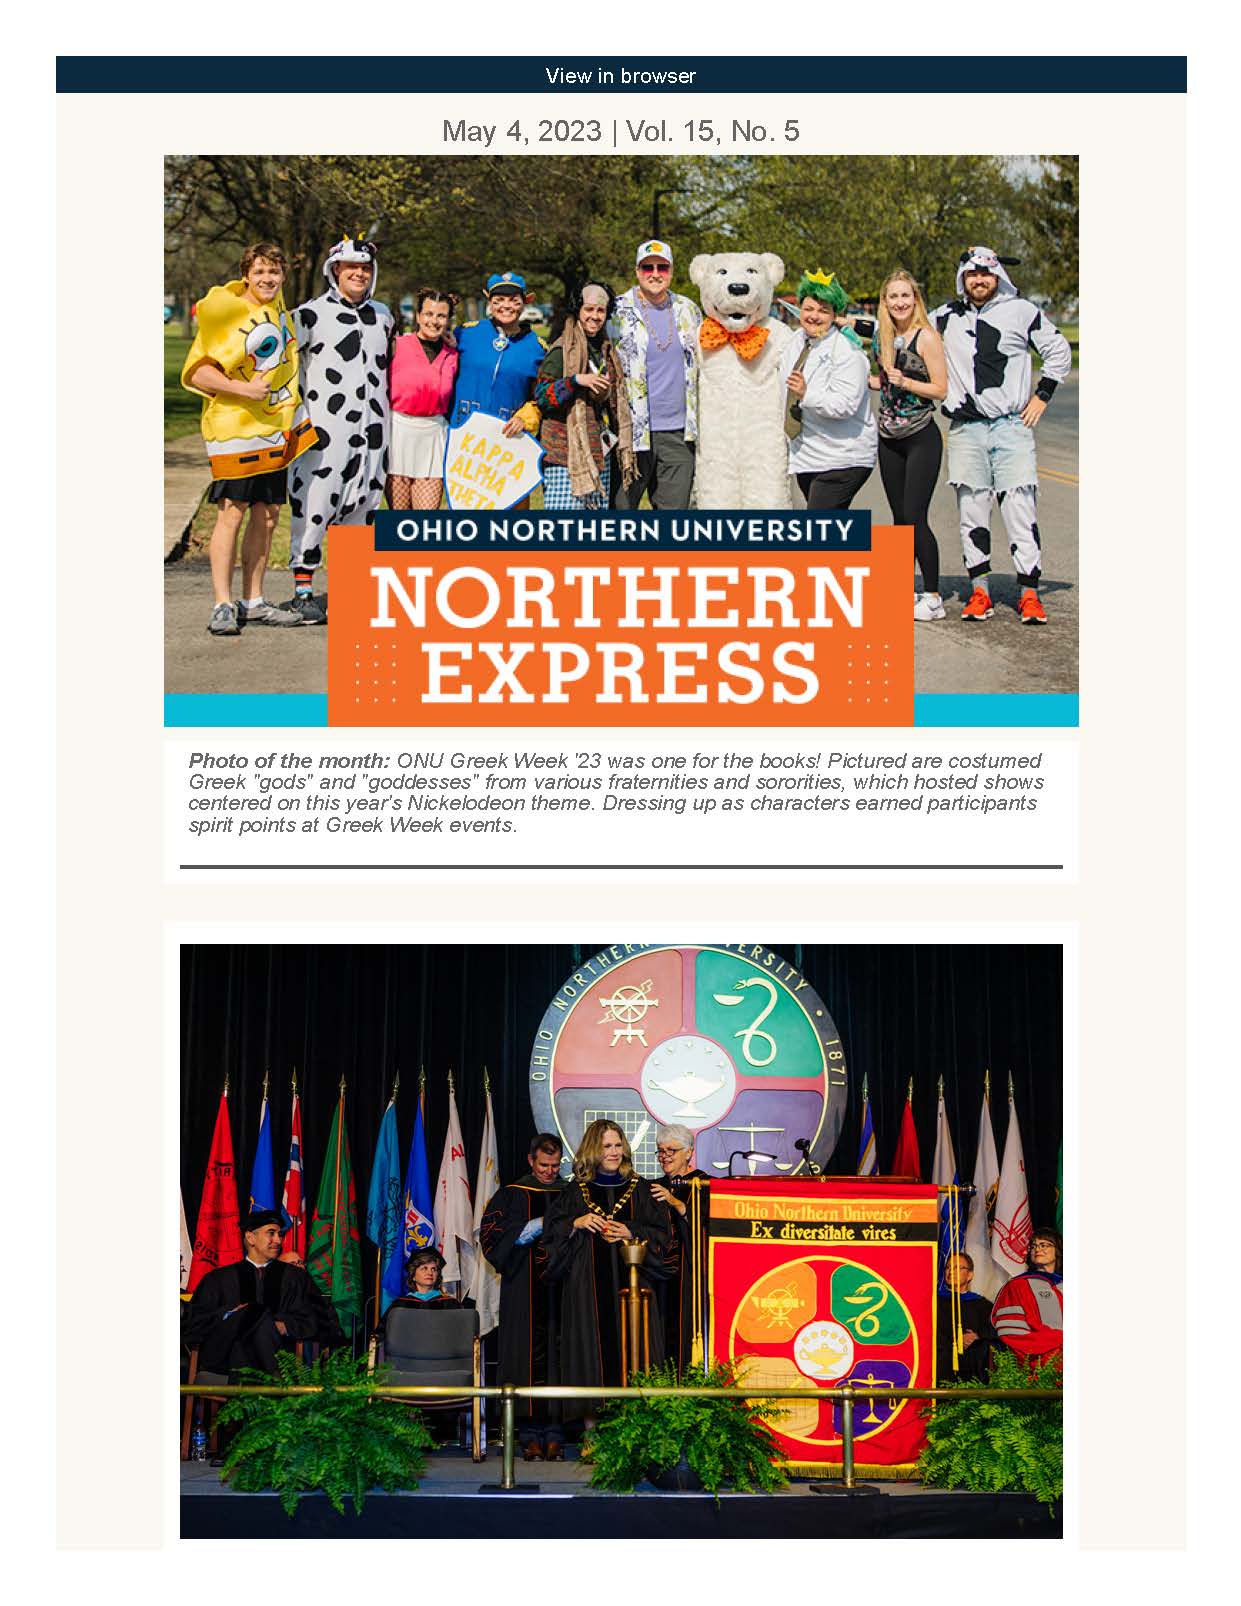 This is a screenshot of the front page of Northern Express